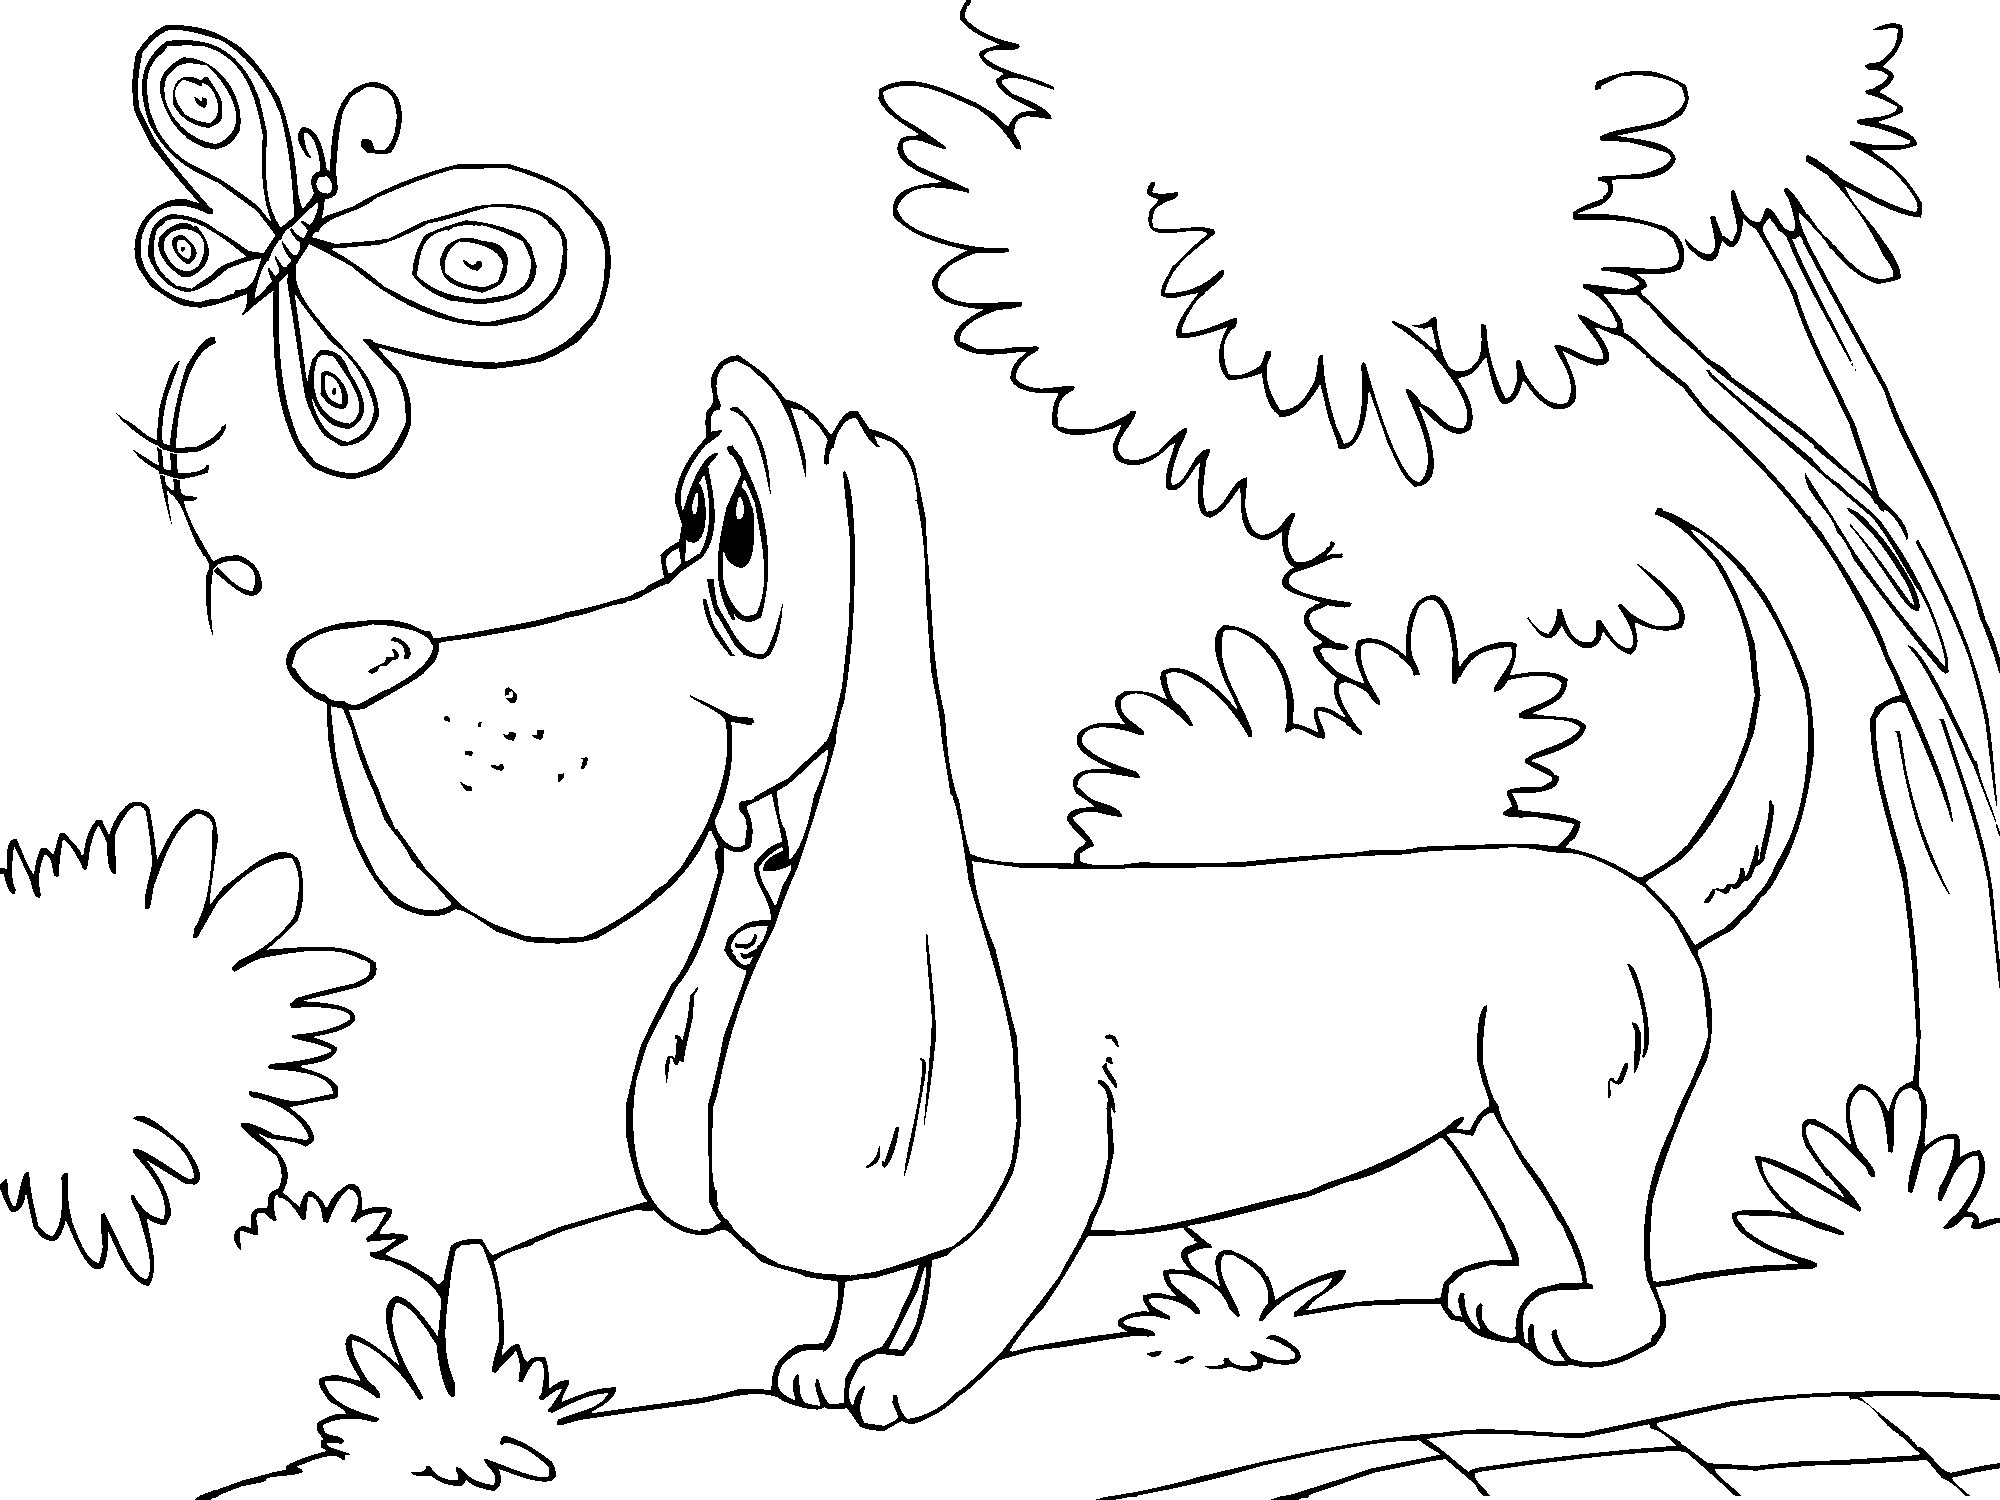 dachshund-dog-coloring-pages-to-download-and-print-for-free